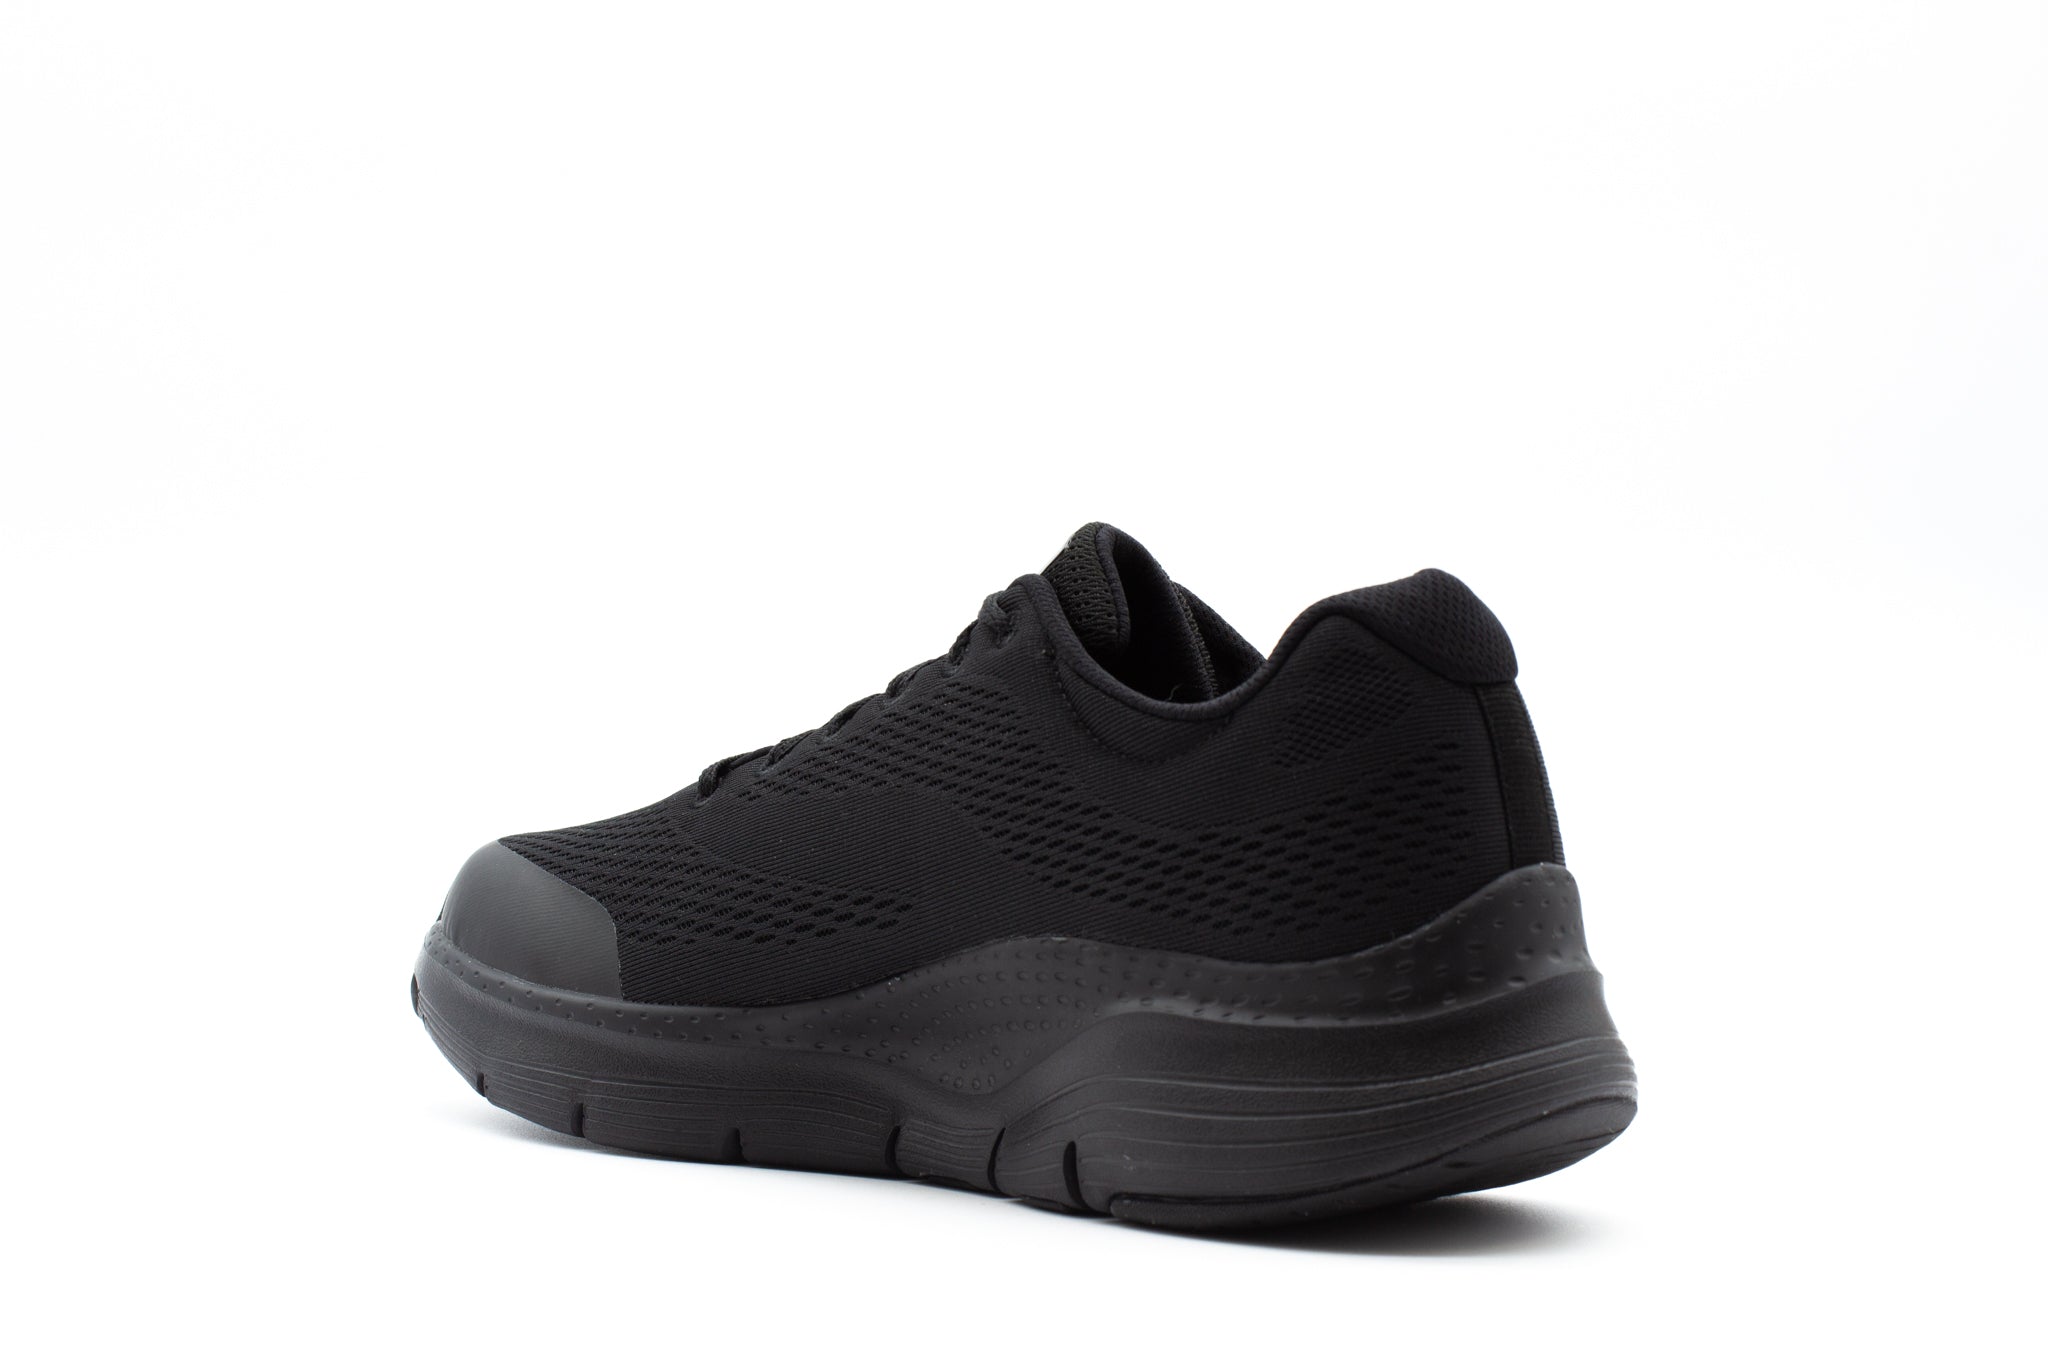 Skechers Mens Arch Fit - Wide Fit